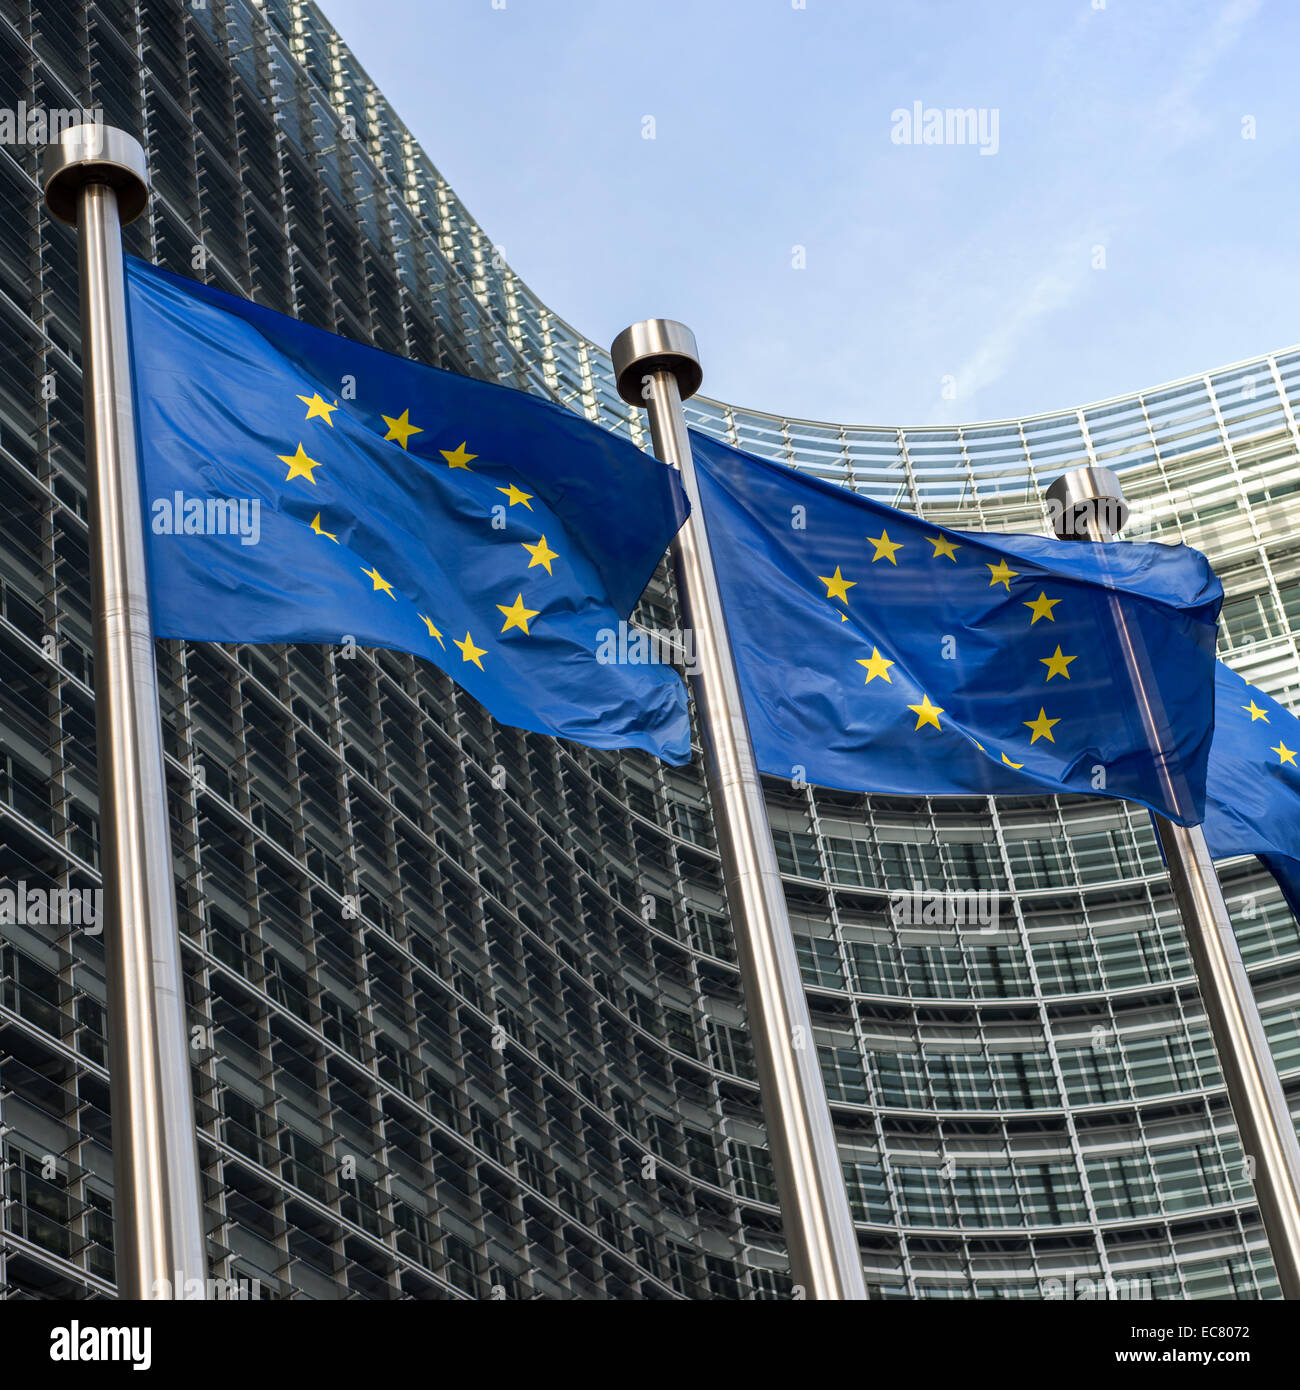 European Union flags in front of the Berlaymont building (European commission) in Brussels, Belgium. Stock Photo